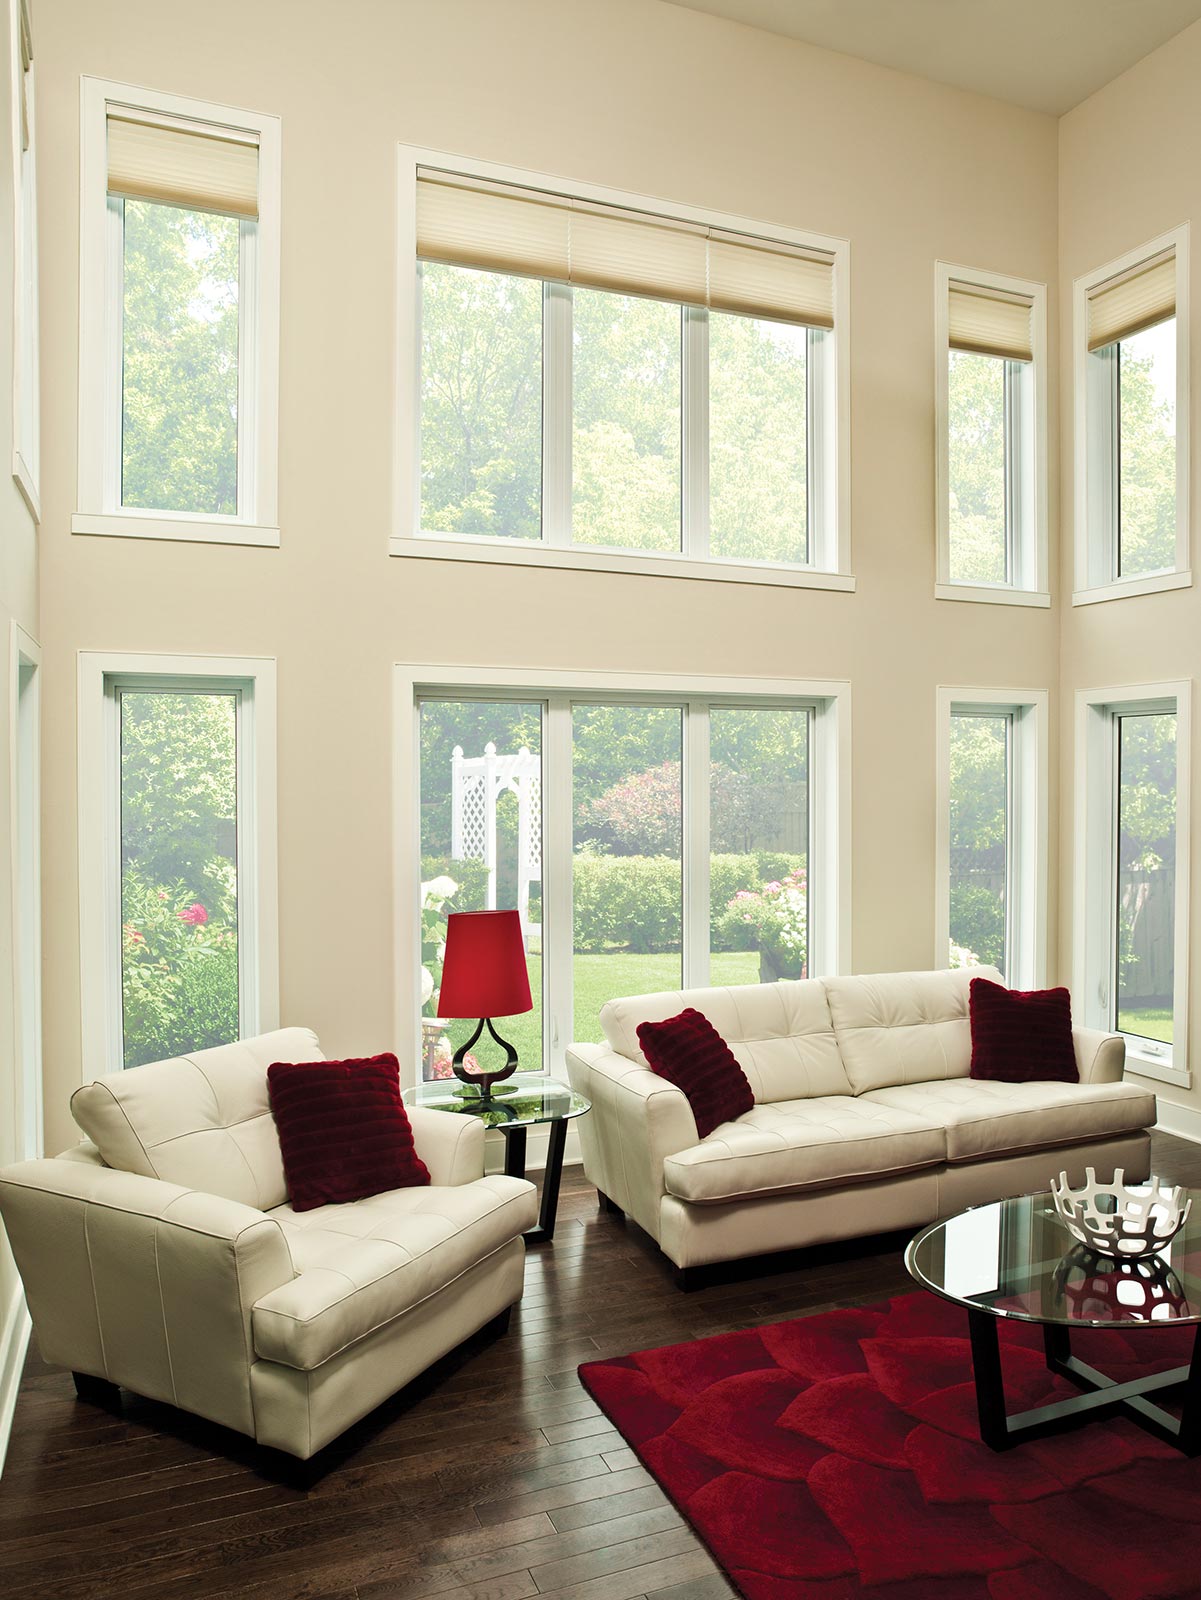 A beautiful display of fixed casement windows from Turkstra Lumber that span two storeys and at least twenty feet